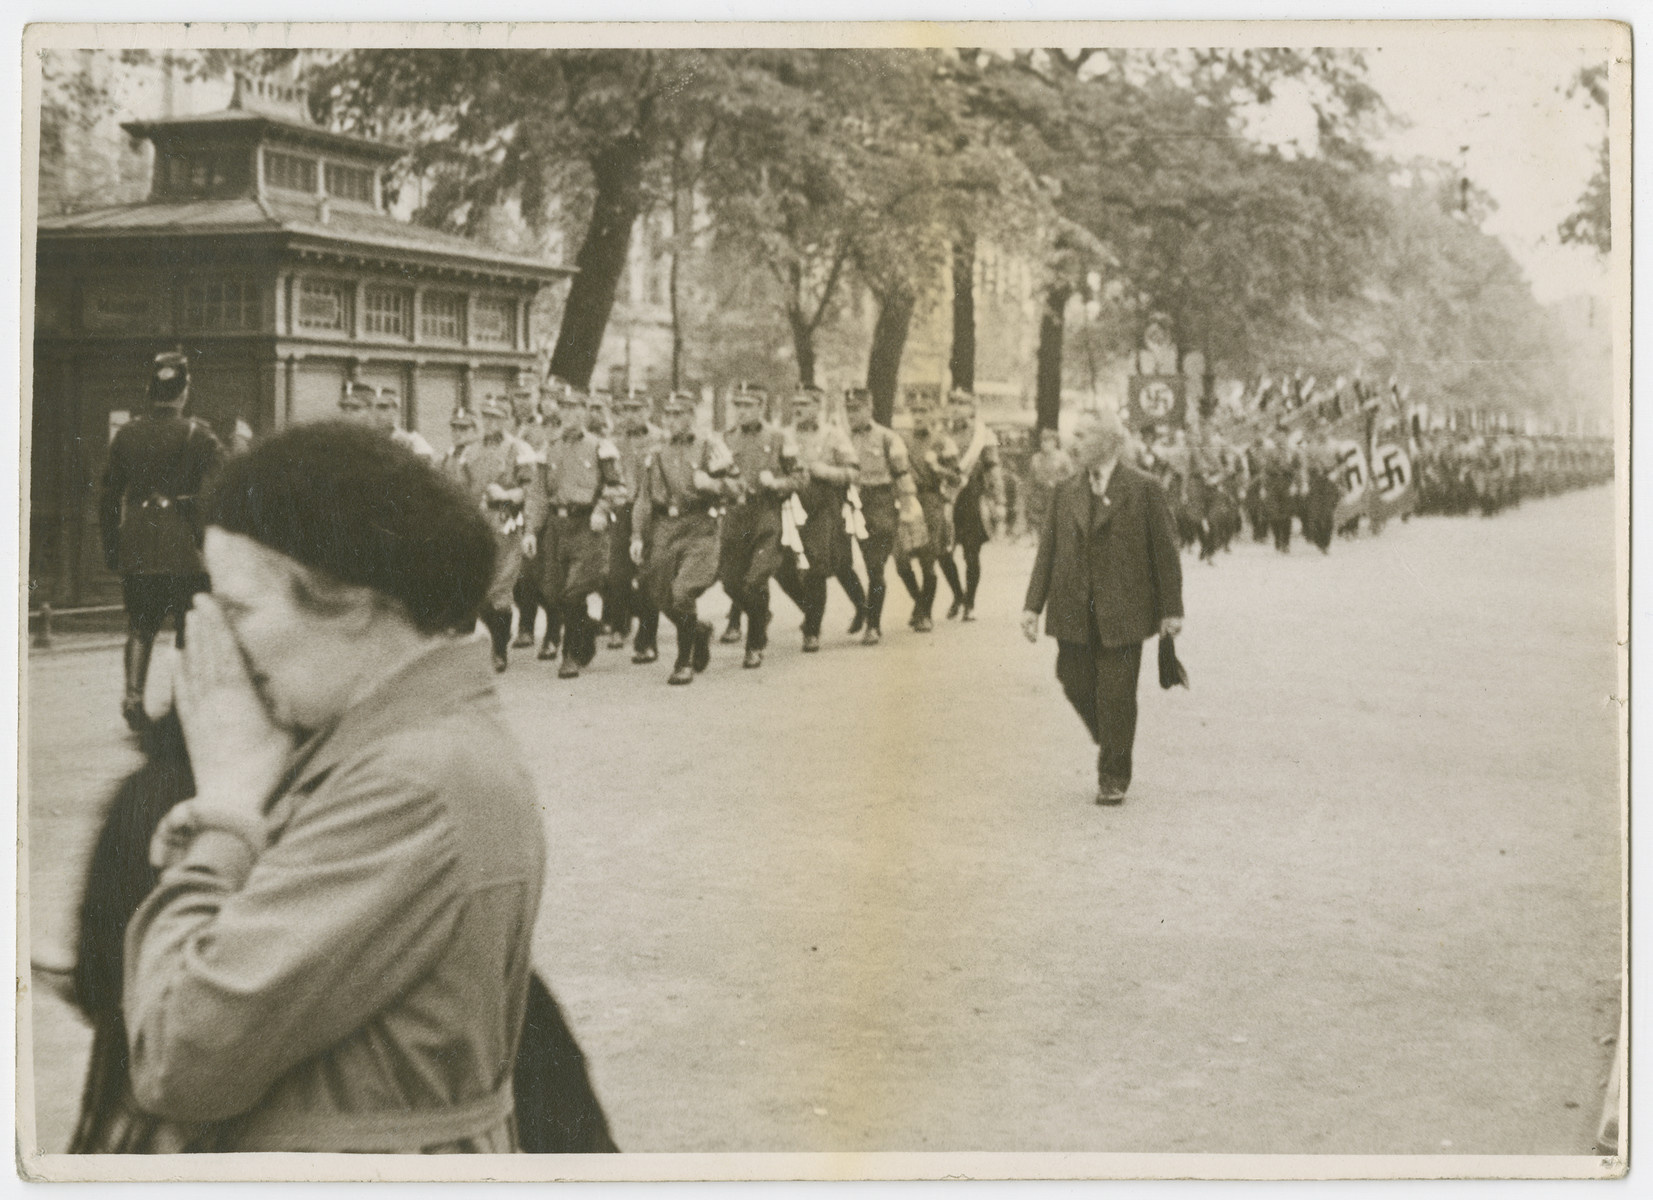 SA troops march down a street in Germany.

Photograph is used on page 64 of Robert Gessner's "Some of My Best Friends are Jews."  The pencil inscription on the back of the photograph reads, "Germany."